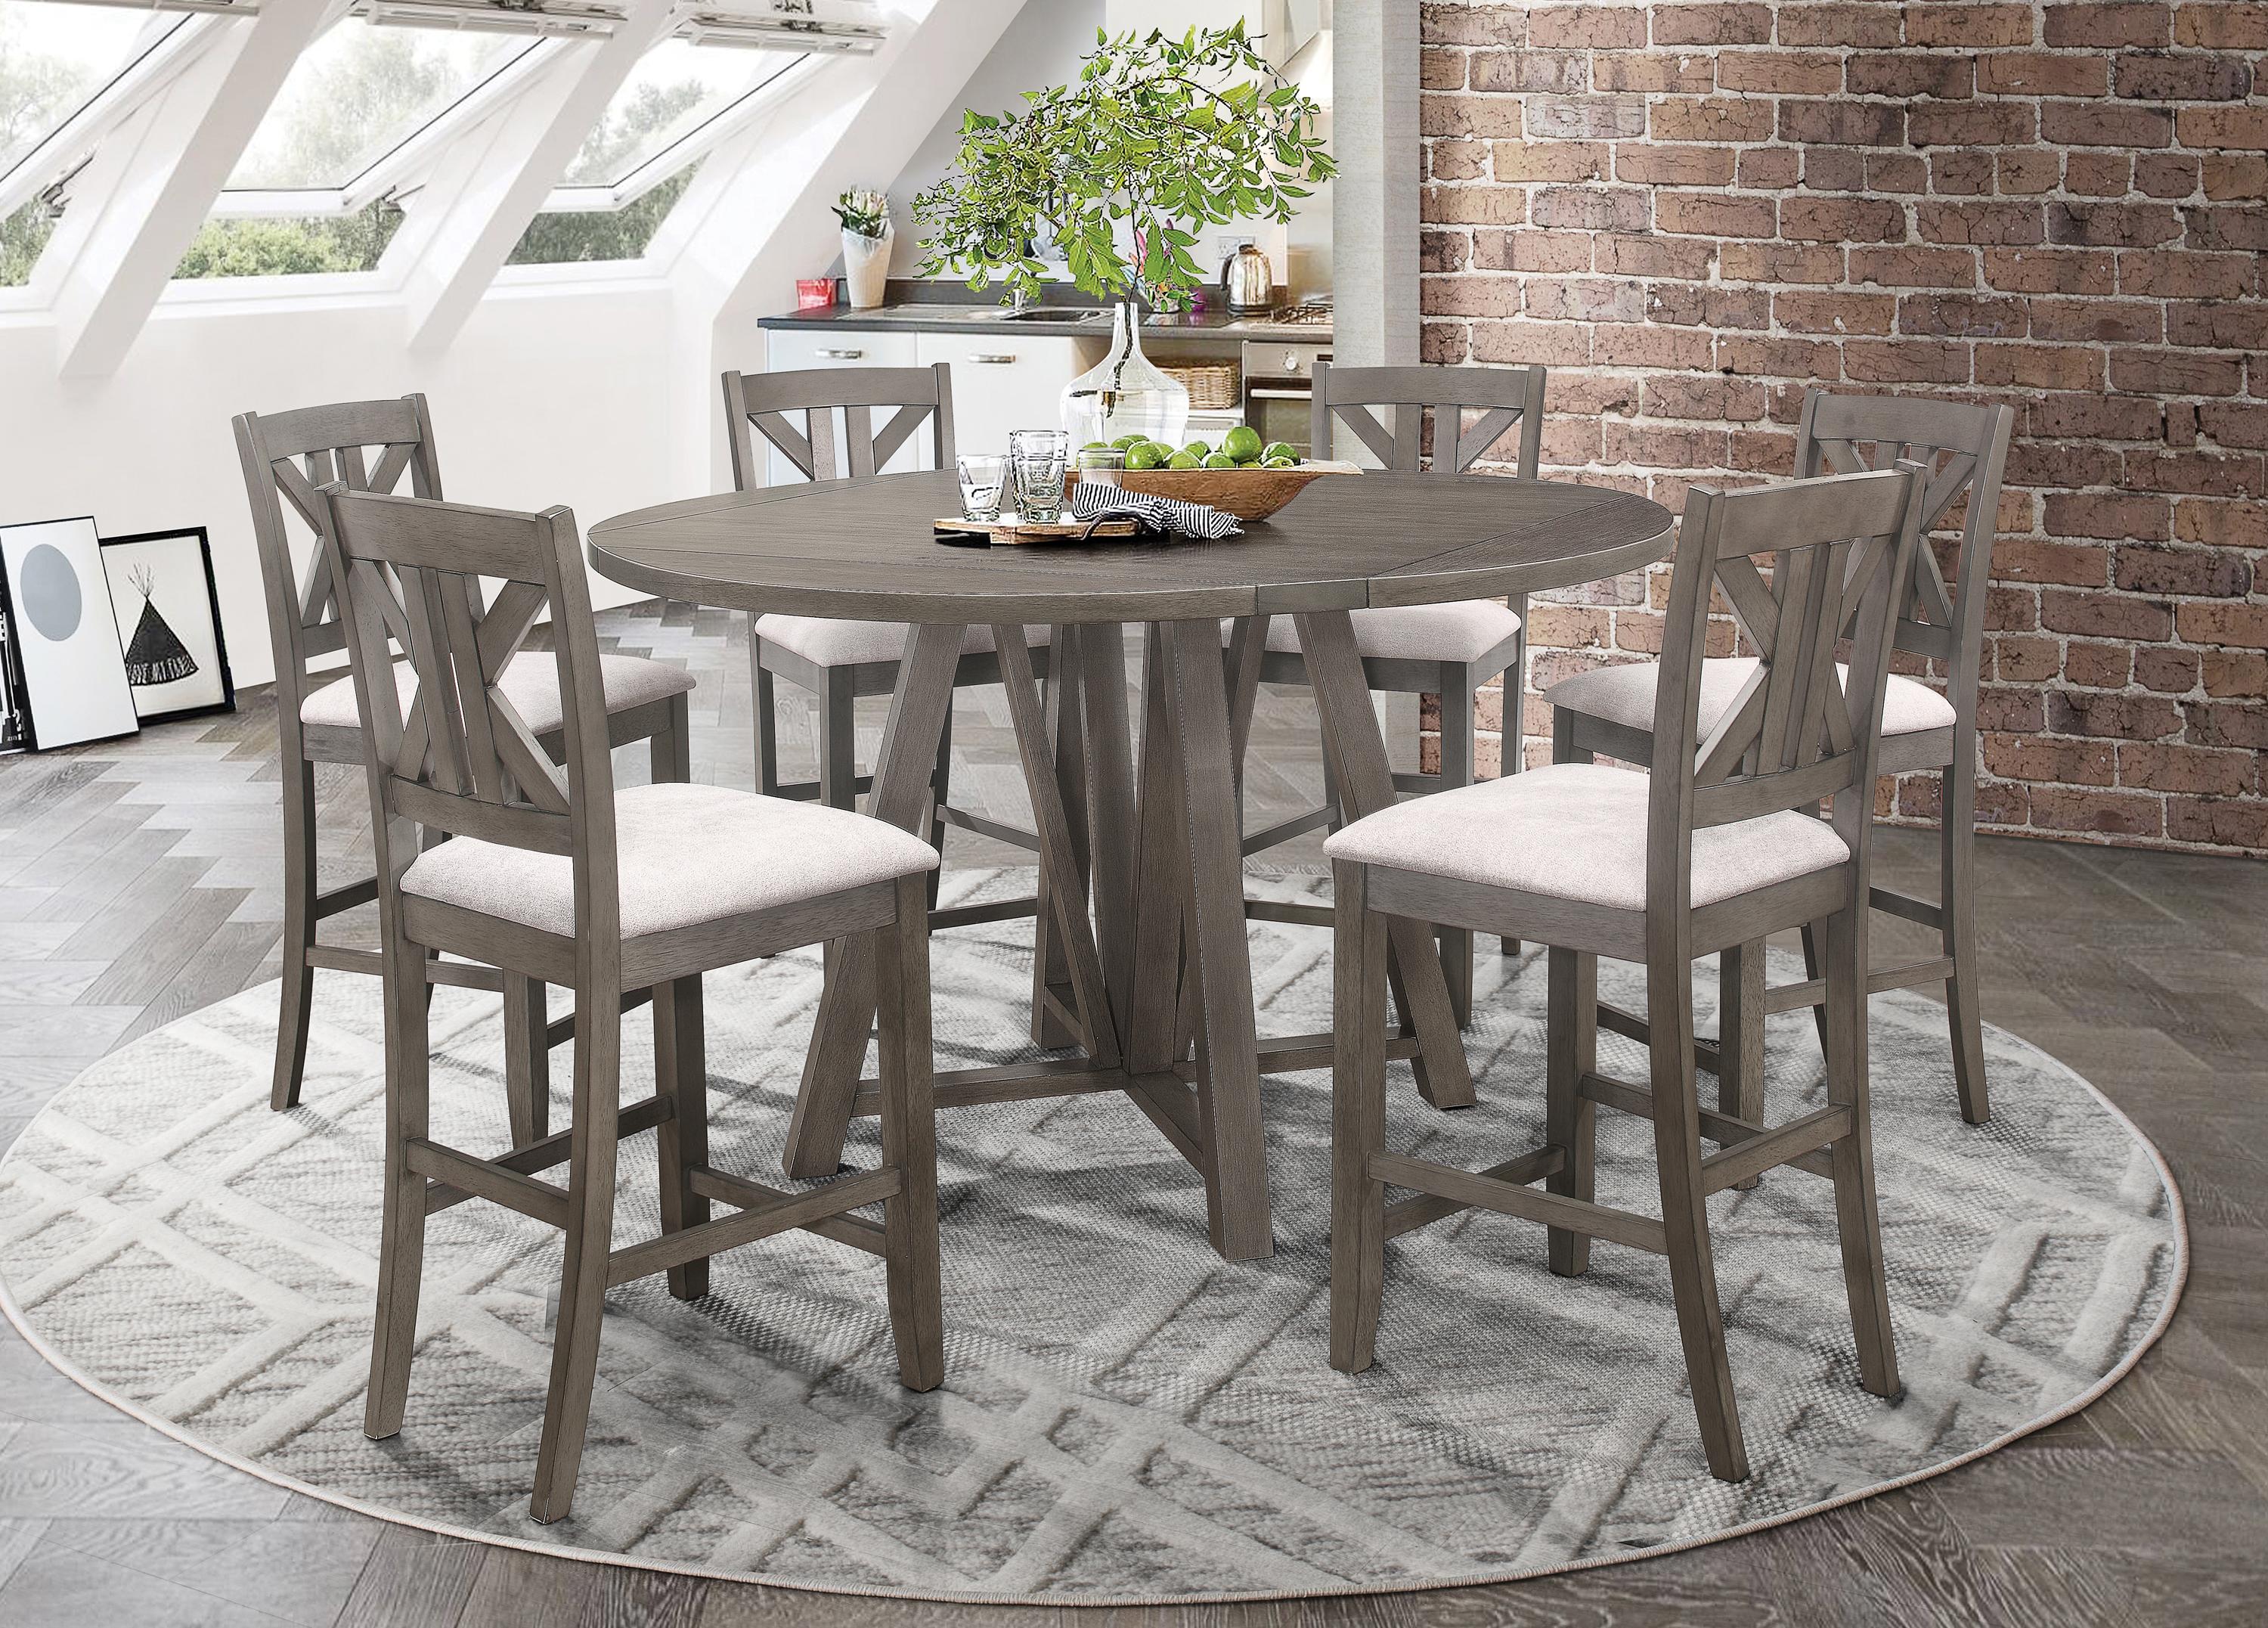 Rustic Dining Room Set 109858-S5 Athens 109858-S5 in Gray Fabric